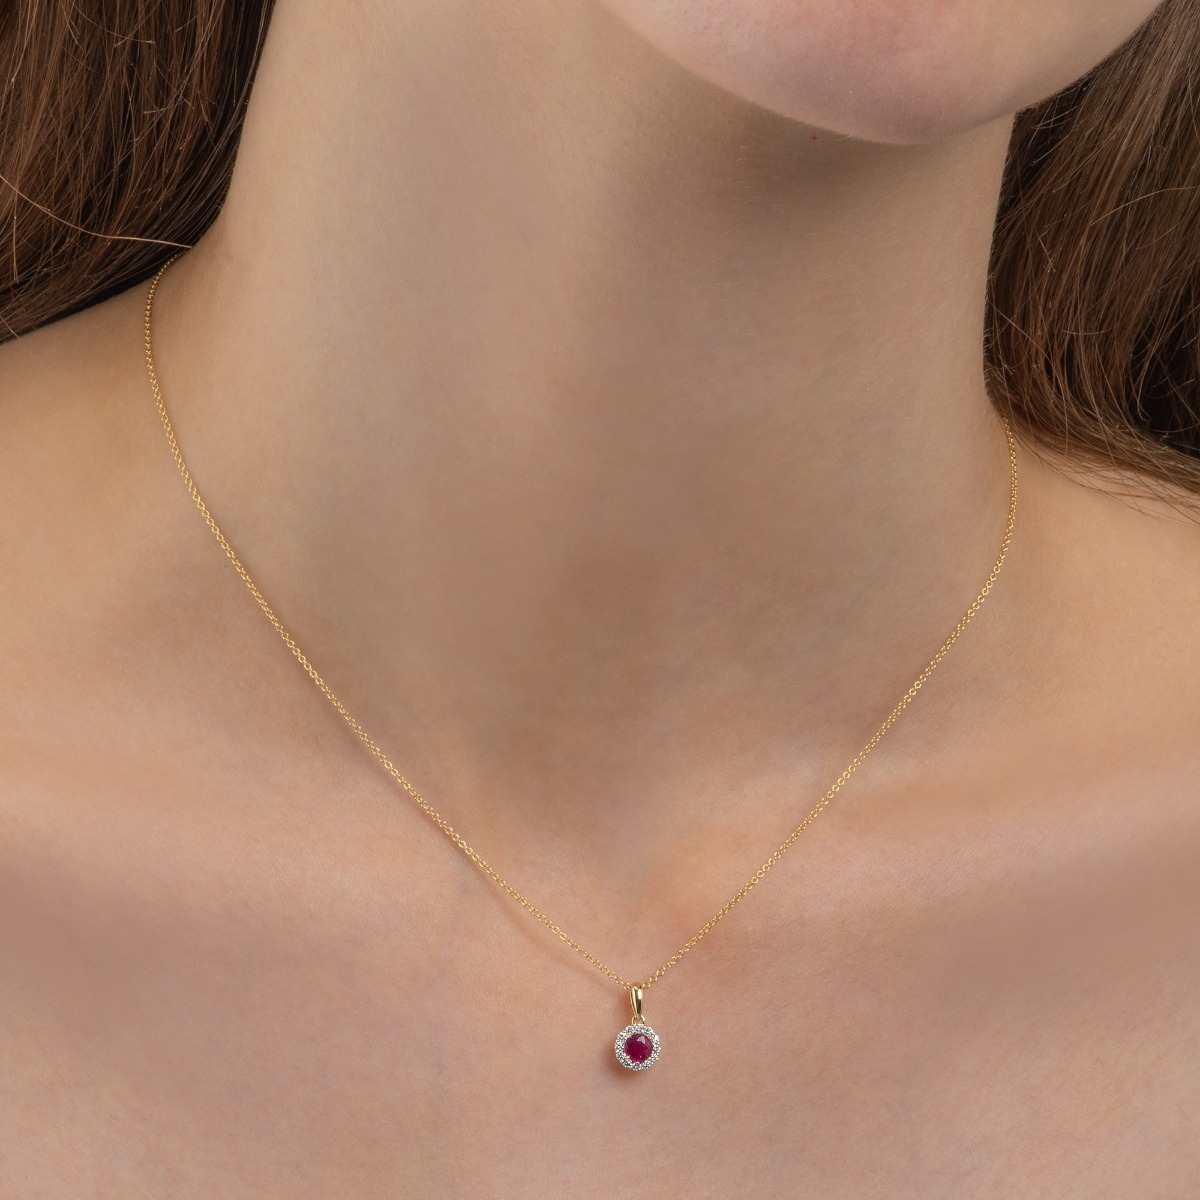 Ruby briolette gemstone pendant Necklace in 14 kt Gold-Filled – Katie  Carrin Sea Glass Jewelry in San Francisco, California